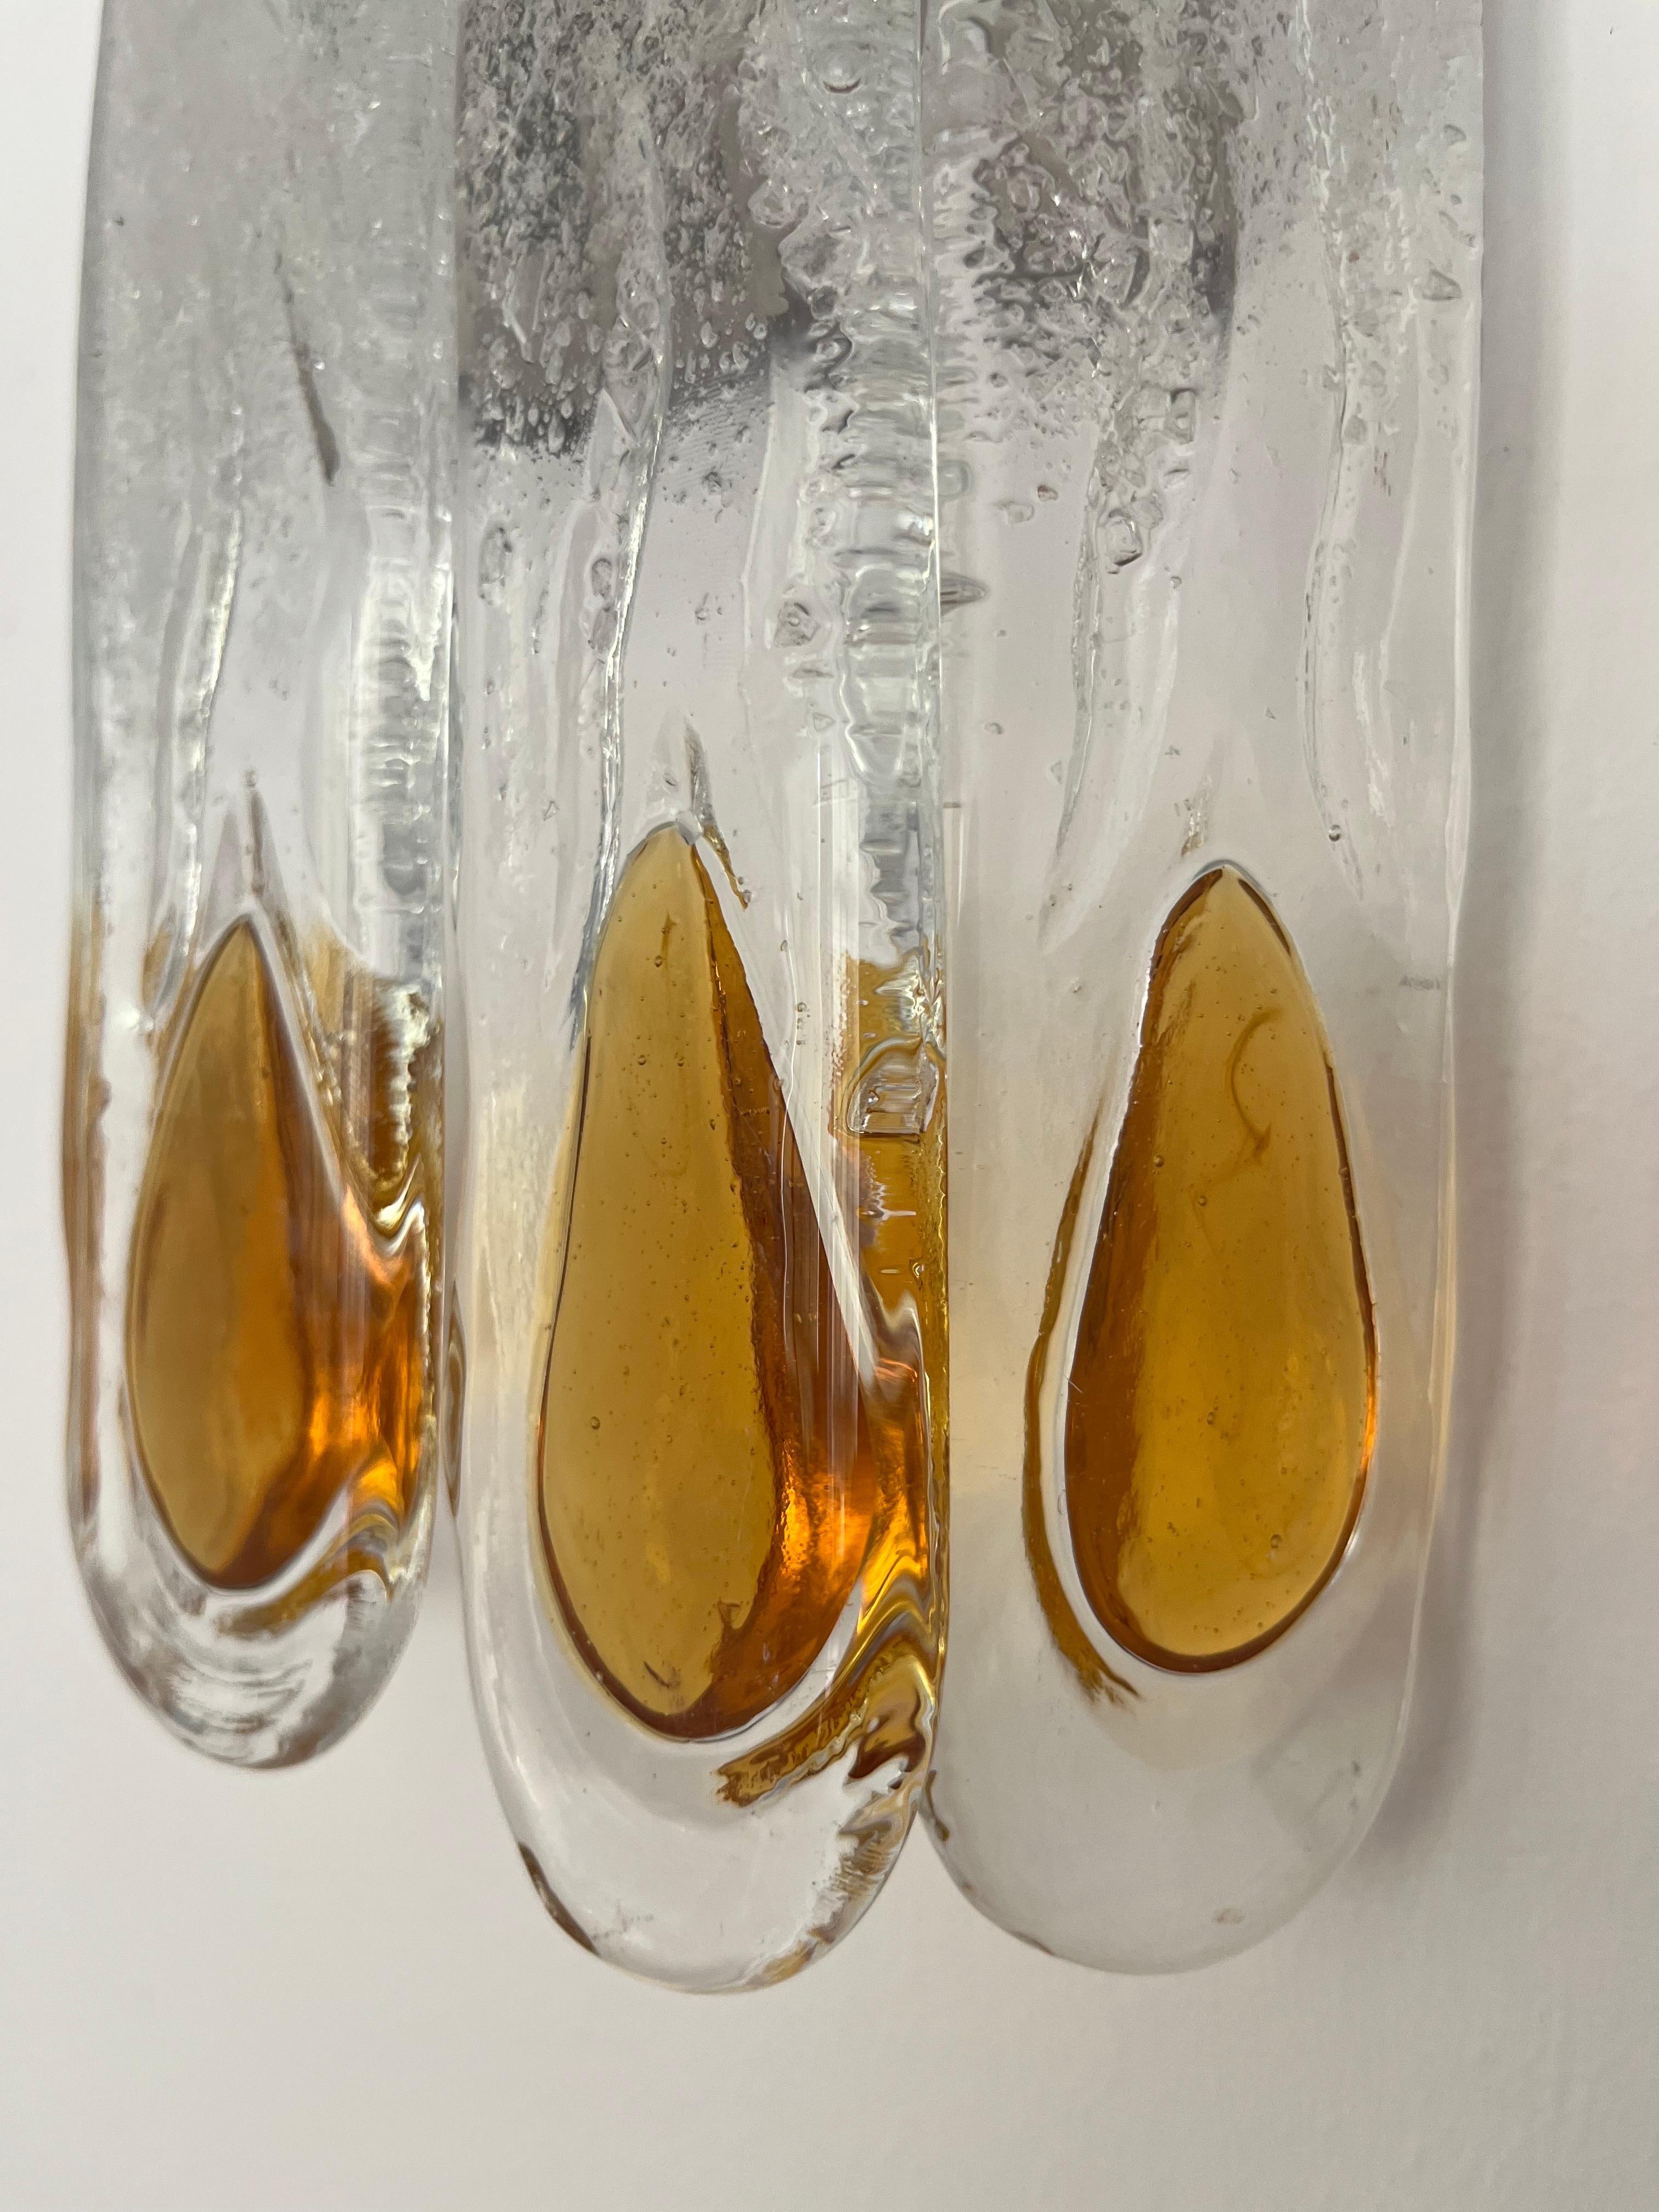 Italian Midcentury Set of Four Amber Clear Wall Sconces by Mazzega, 1970s For Sale 2